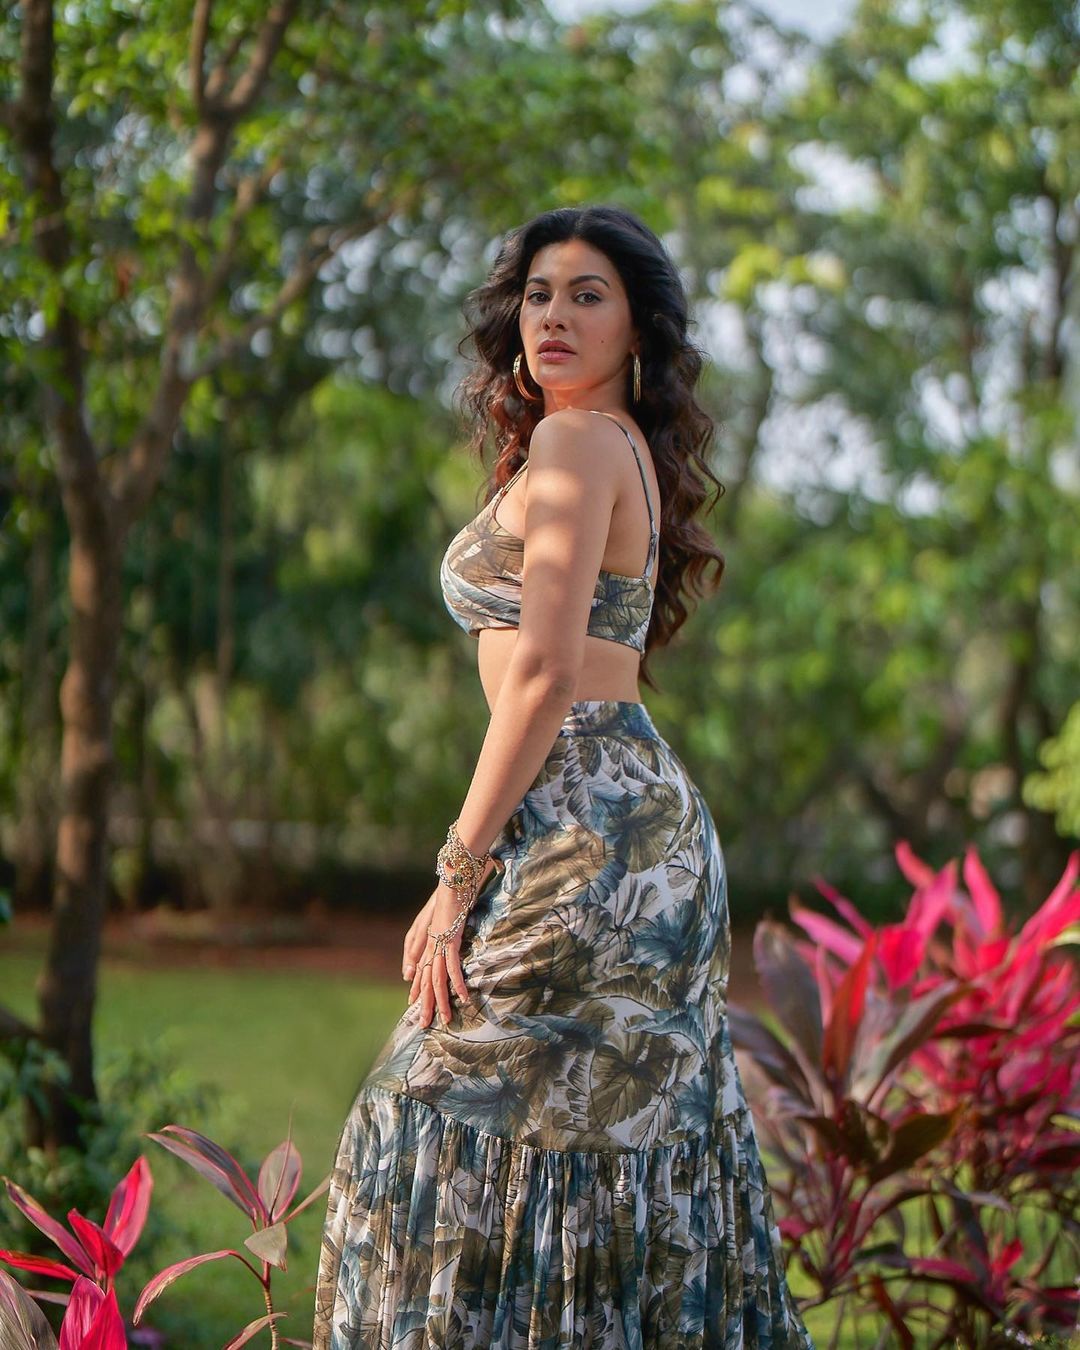 Amyra dastur hot photoshoot in long skirt and crop top video getting viral